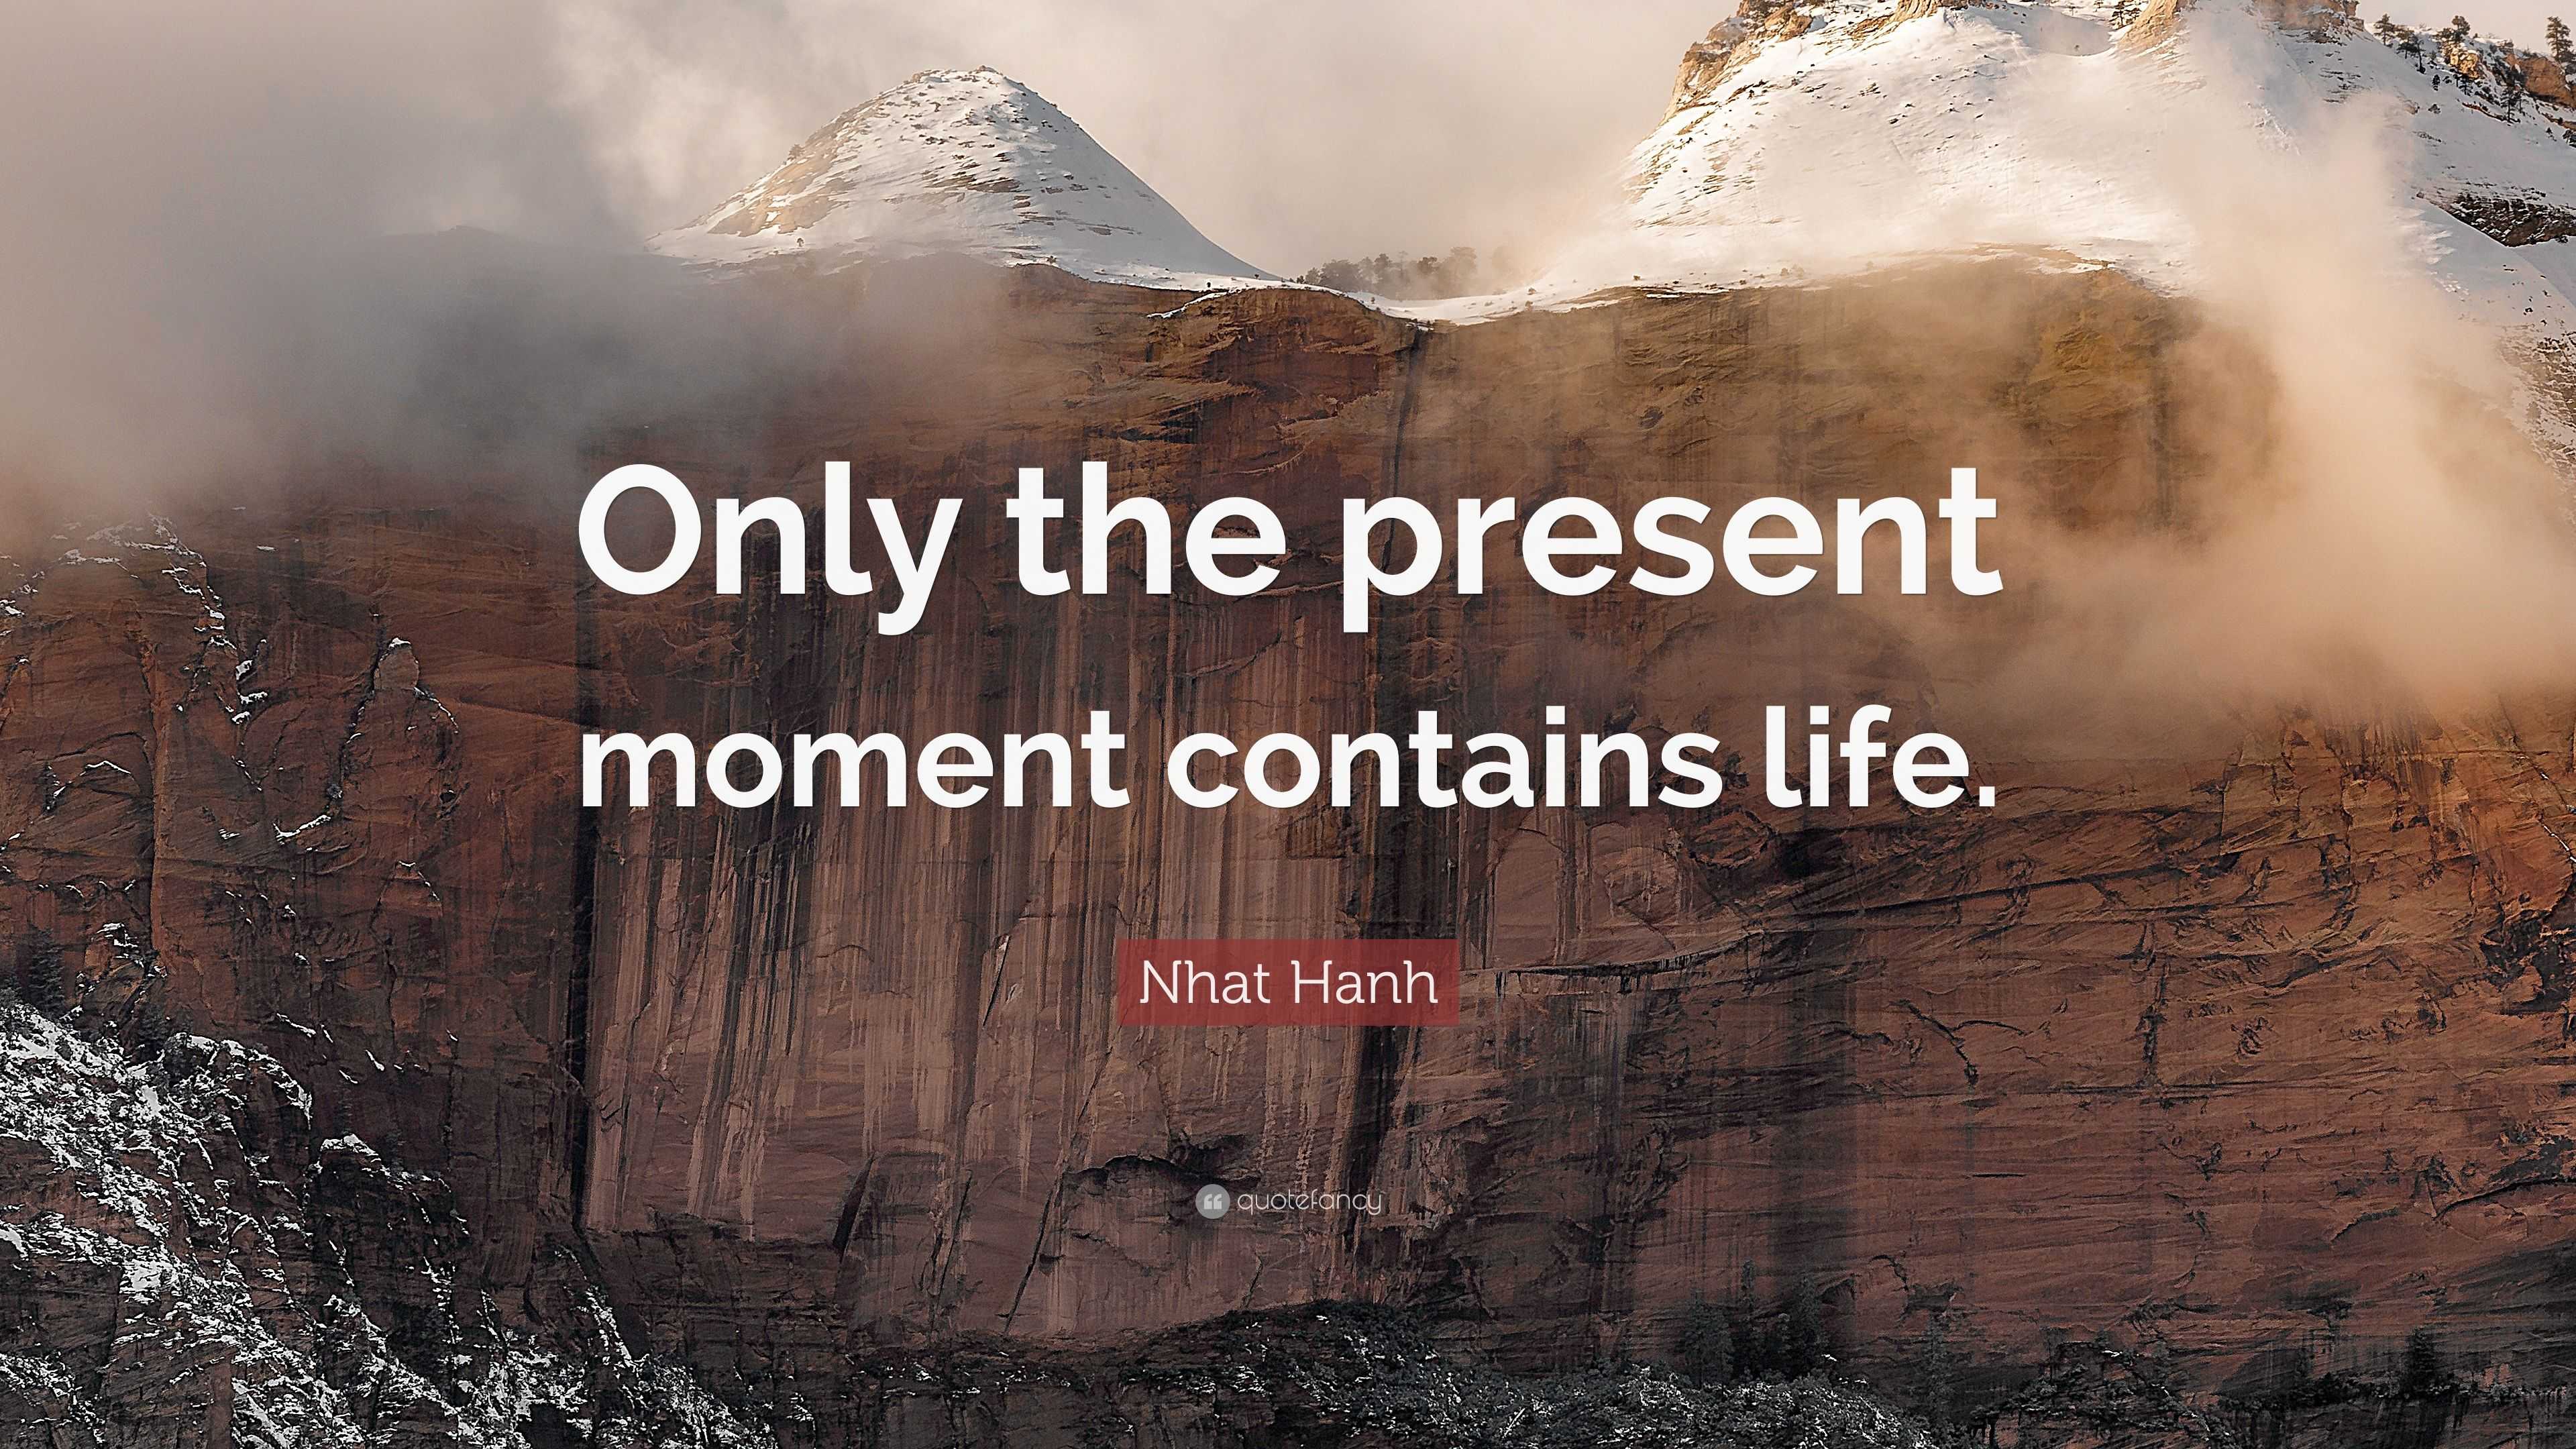 Nhat Hanh Quote: “Only the present moment contains life.”